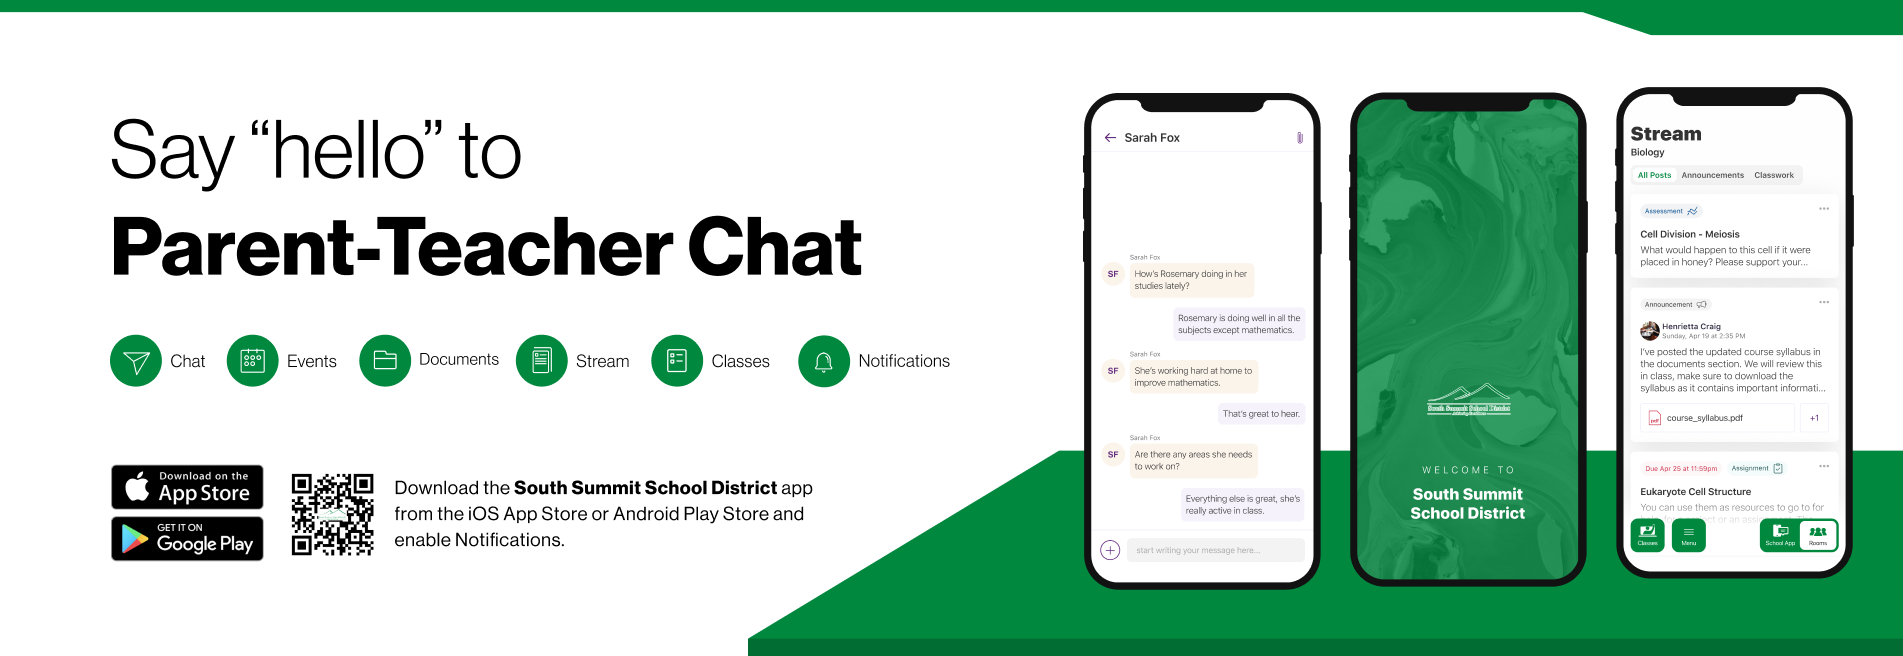 Say hello to Parent-Teacher chat in the new Rooms app. Download the Summit School app in the Google Play or Apple App store